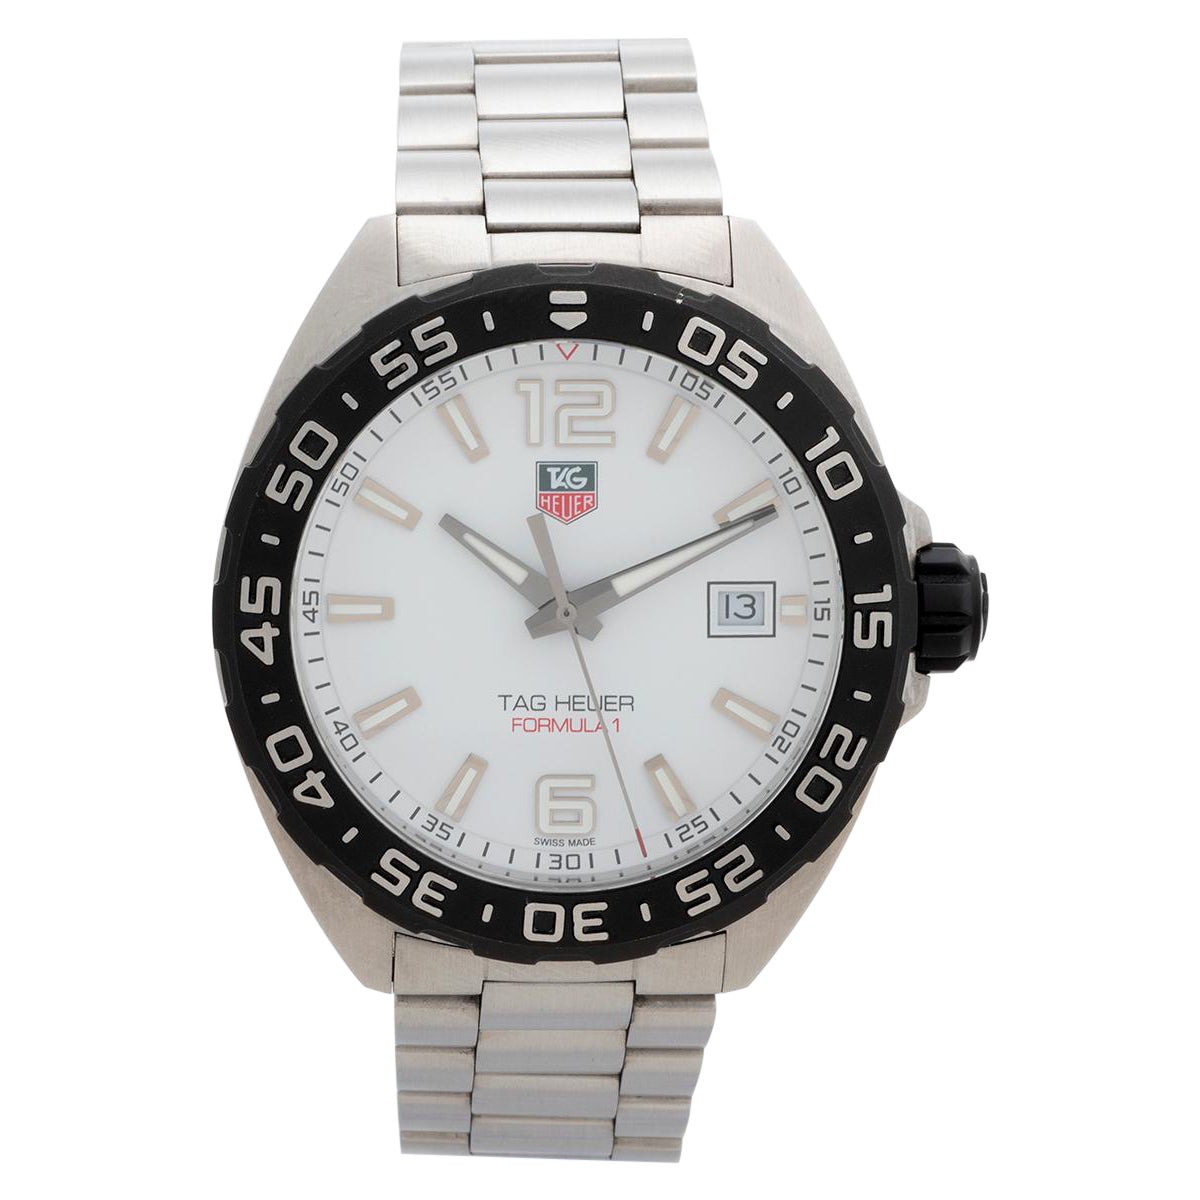 What is the meaning of Tag Heuer?